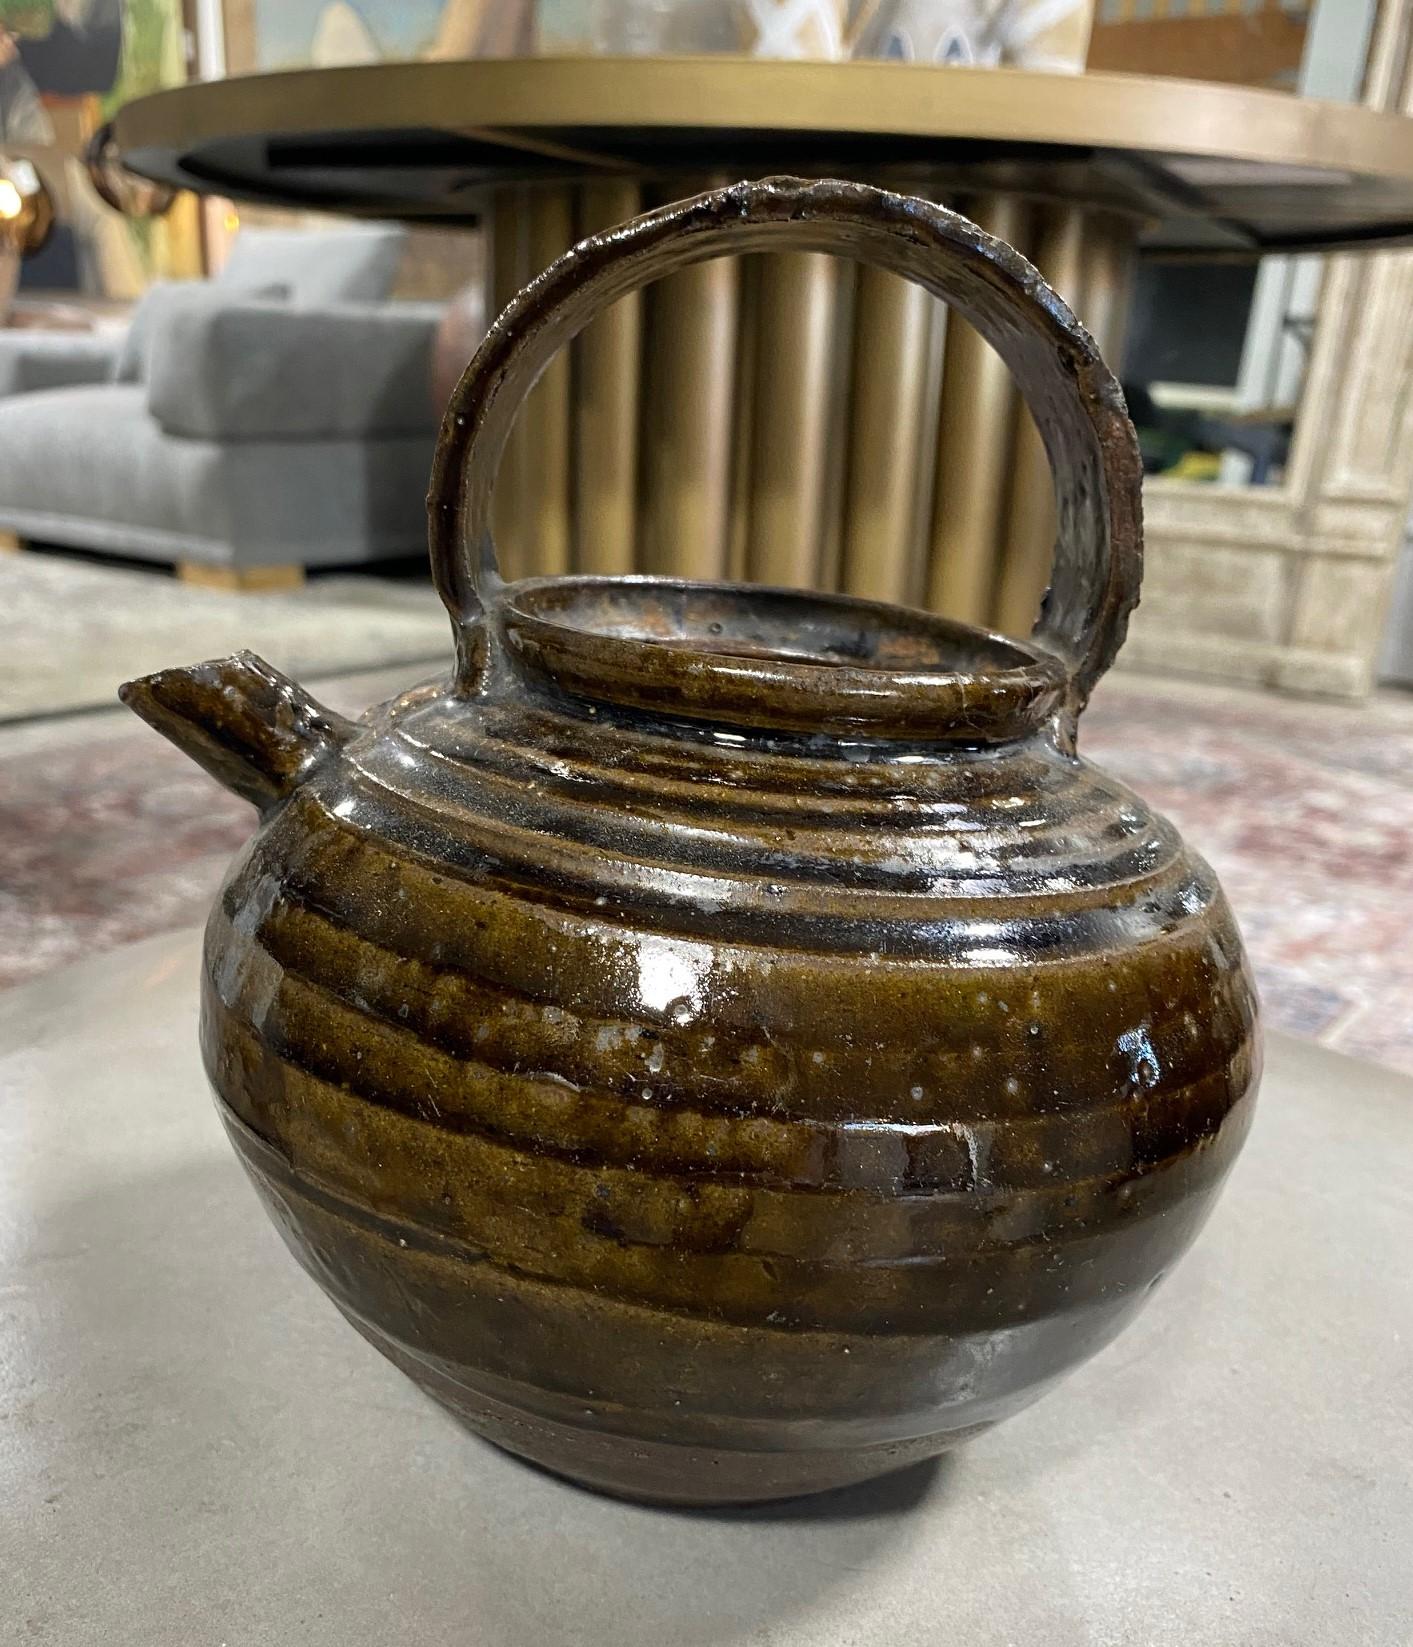 A wonderfully crafted Korean stoneware pottery teapot with a beautiful muted green and brown glaze, color, and nicely aged patina. This work radiates in the light.
We believe this piece is from the Joseon Dynasty (1392-1897) but as this is not our